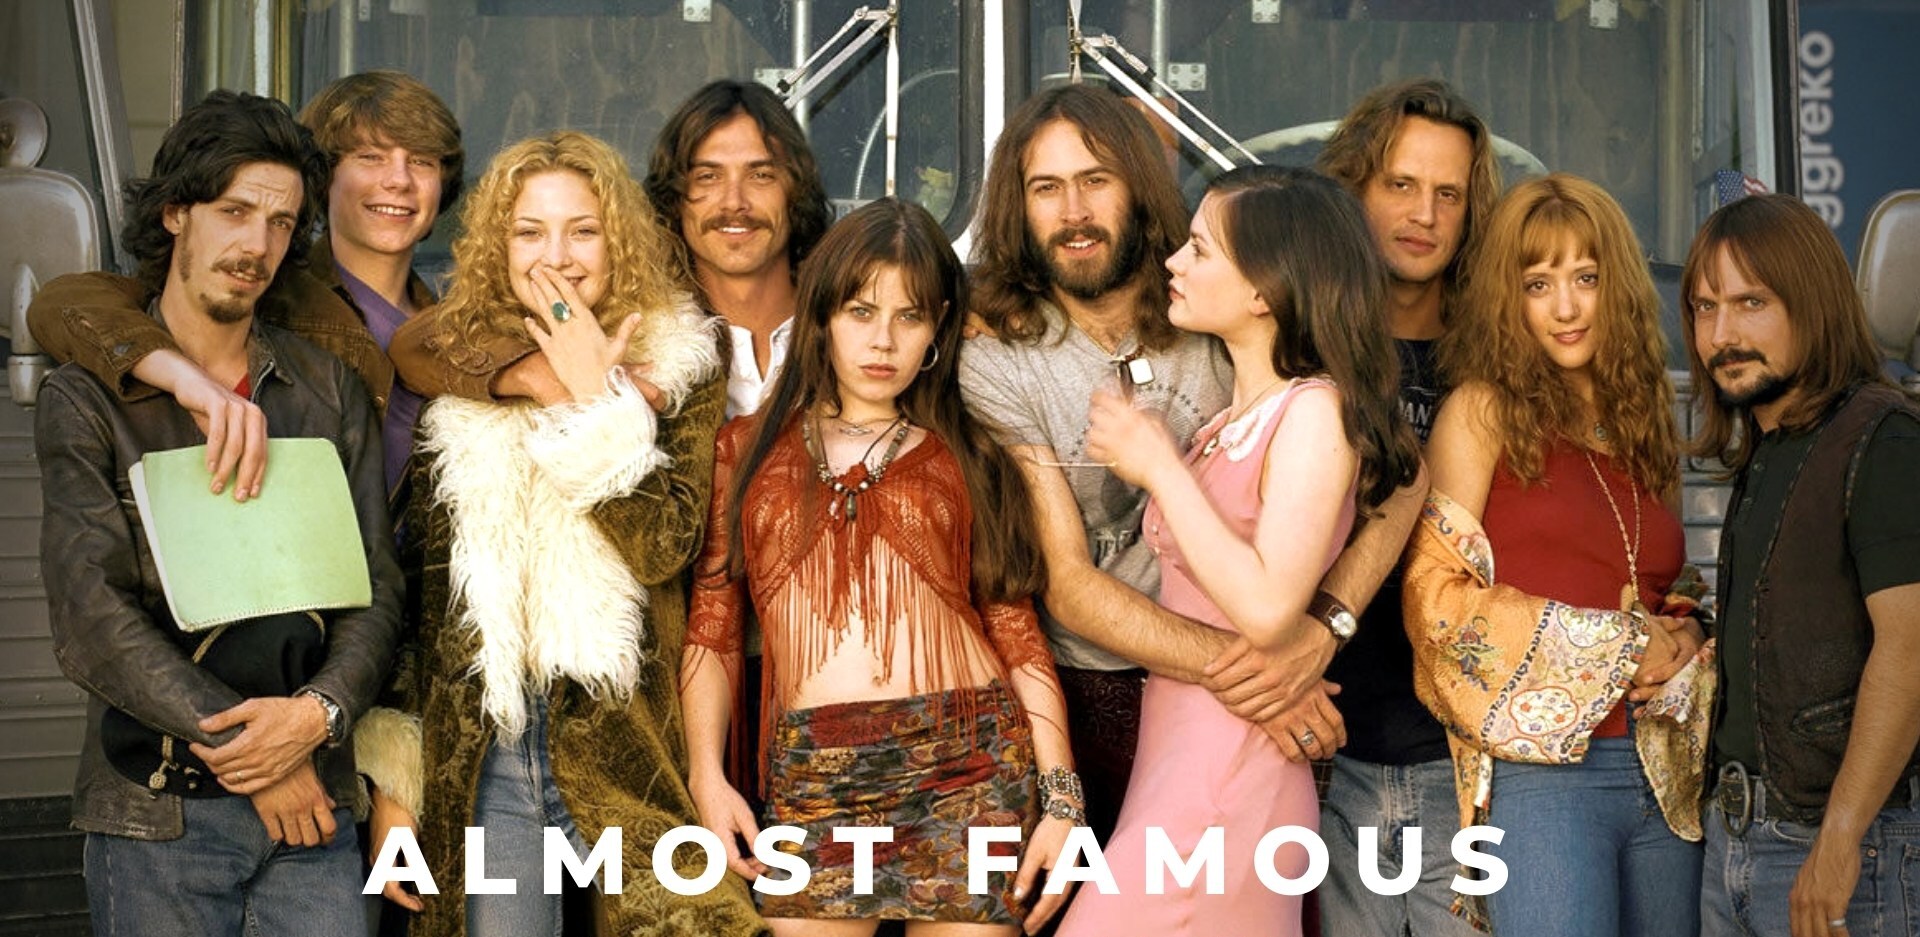 41-facts-about-the-movie-almost-famous